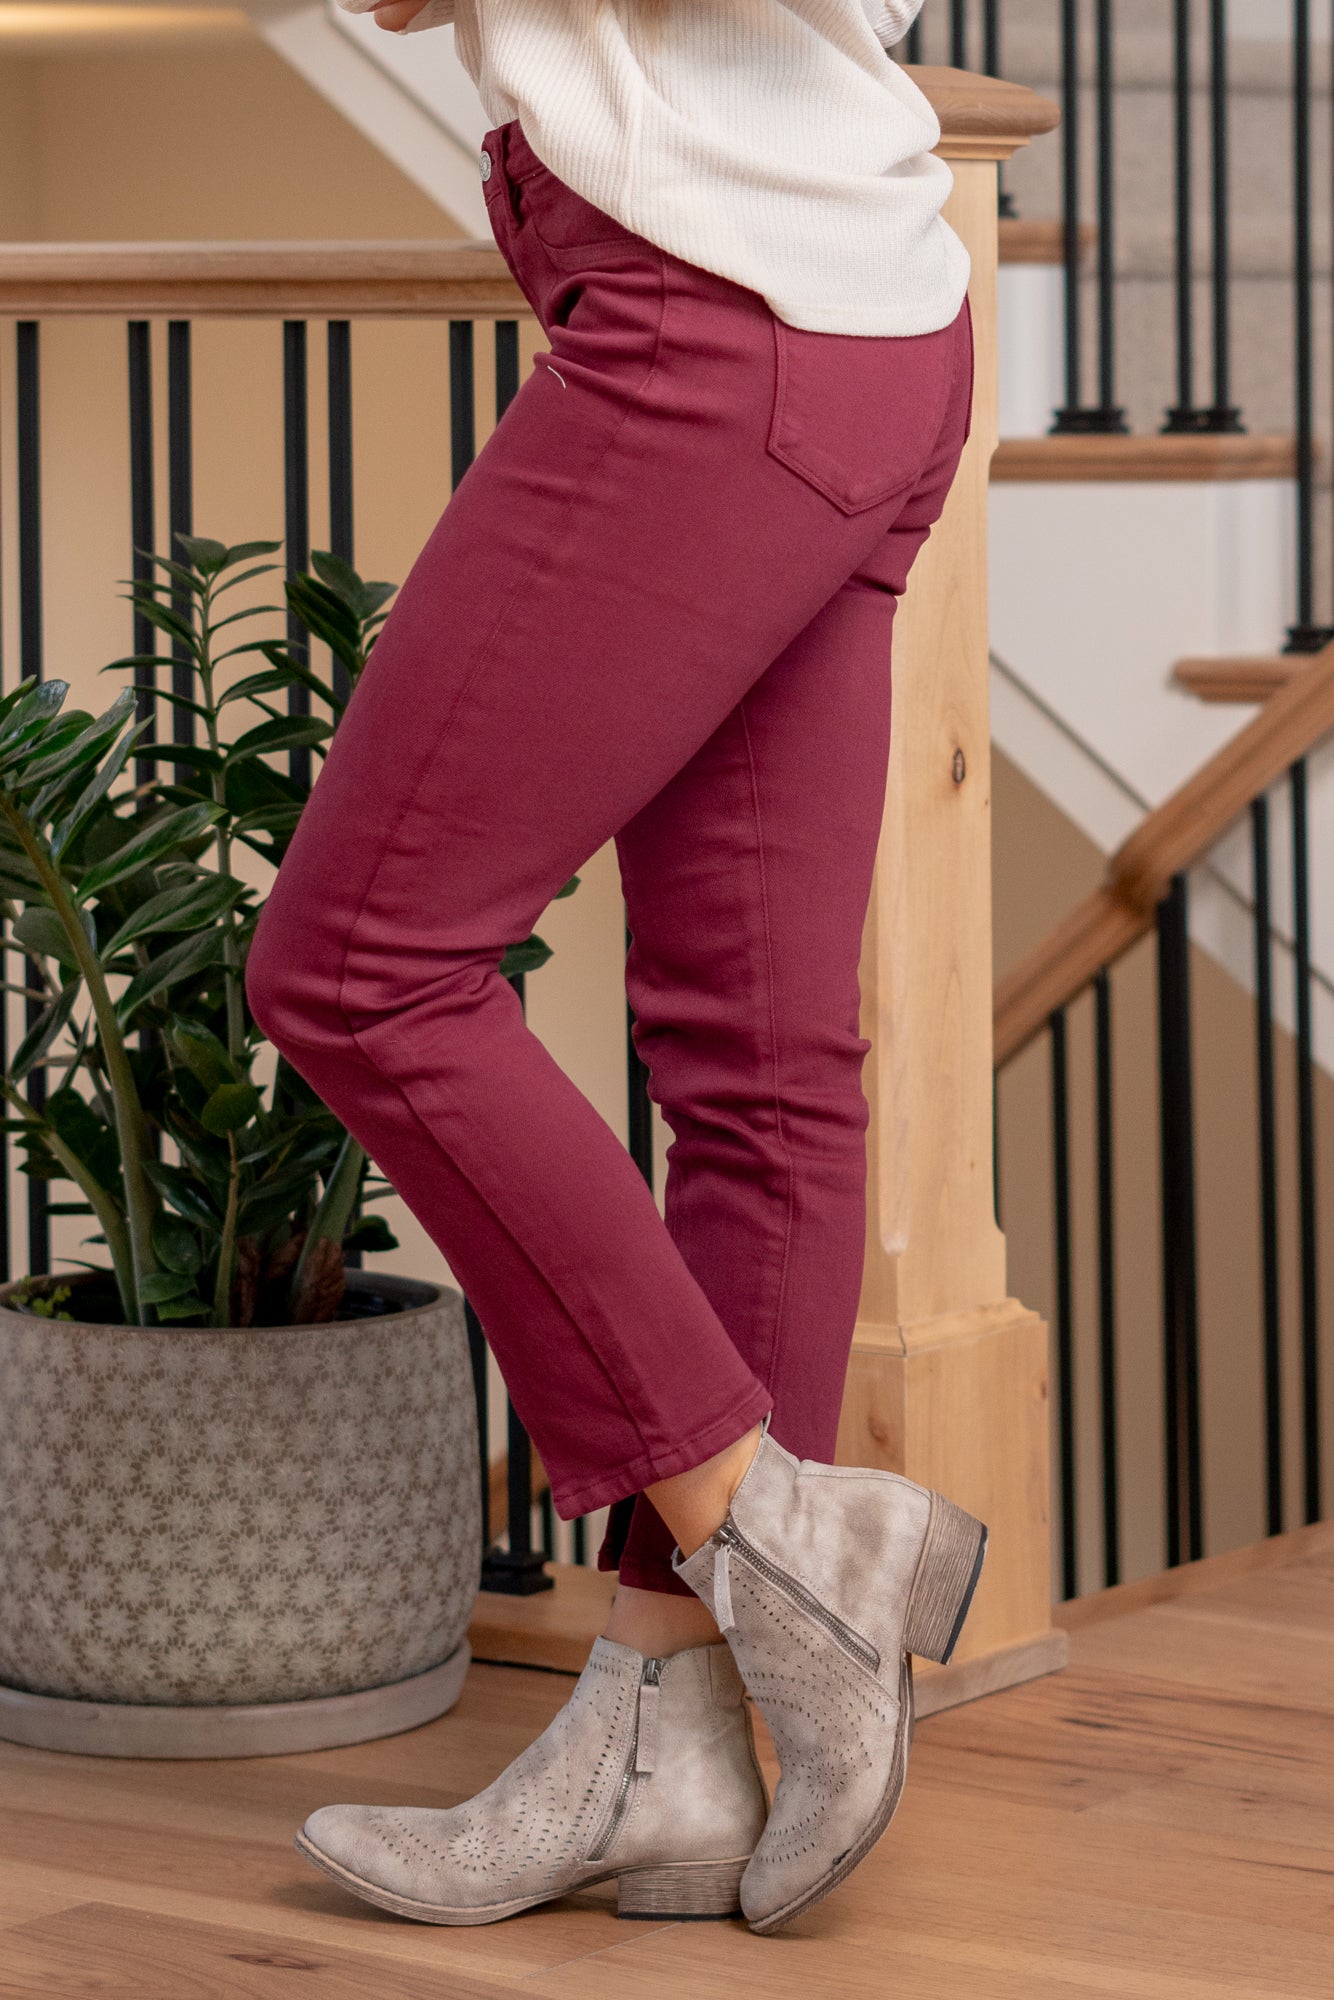 Belinda Mid Rise Skinny Straight Leg Jeans comes in three beautiful color tones. Made with stretchy denim fabric that hugs your body in the right places. This jean sits right at the waist for an easy fit that's both comfortable and chic. Features a front center slit, for an edgier look and feel.  Color: Burgundy Cut: Skinny Straight, 27" Inseam* Rise: Mid-Rise, 9.5" Front Rise* Material: 94.8% Cotton, 4% t-400, 1.2% Spandex Stitching: Classic Fly: Zipper  Style #: KC7453BU